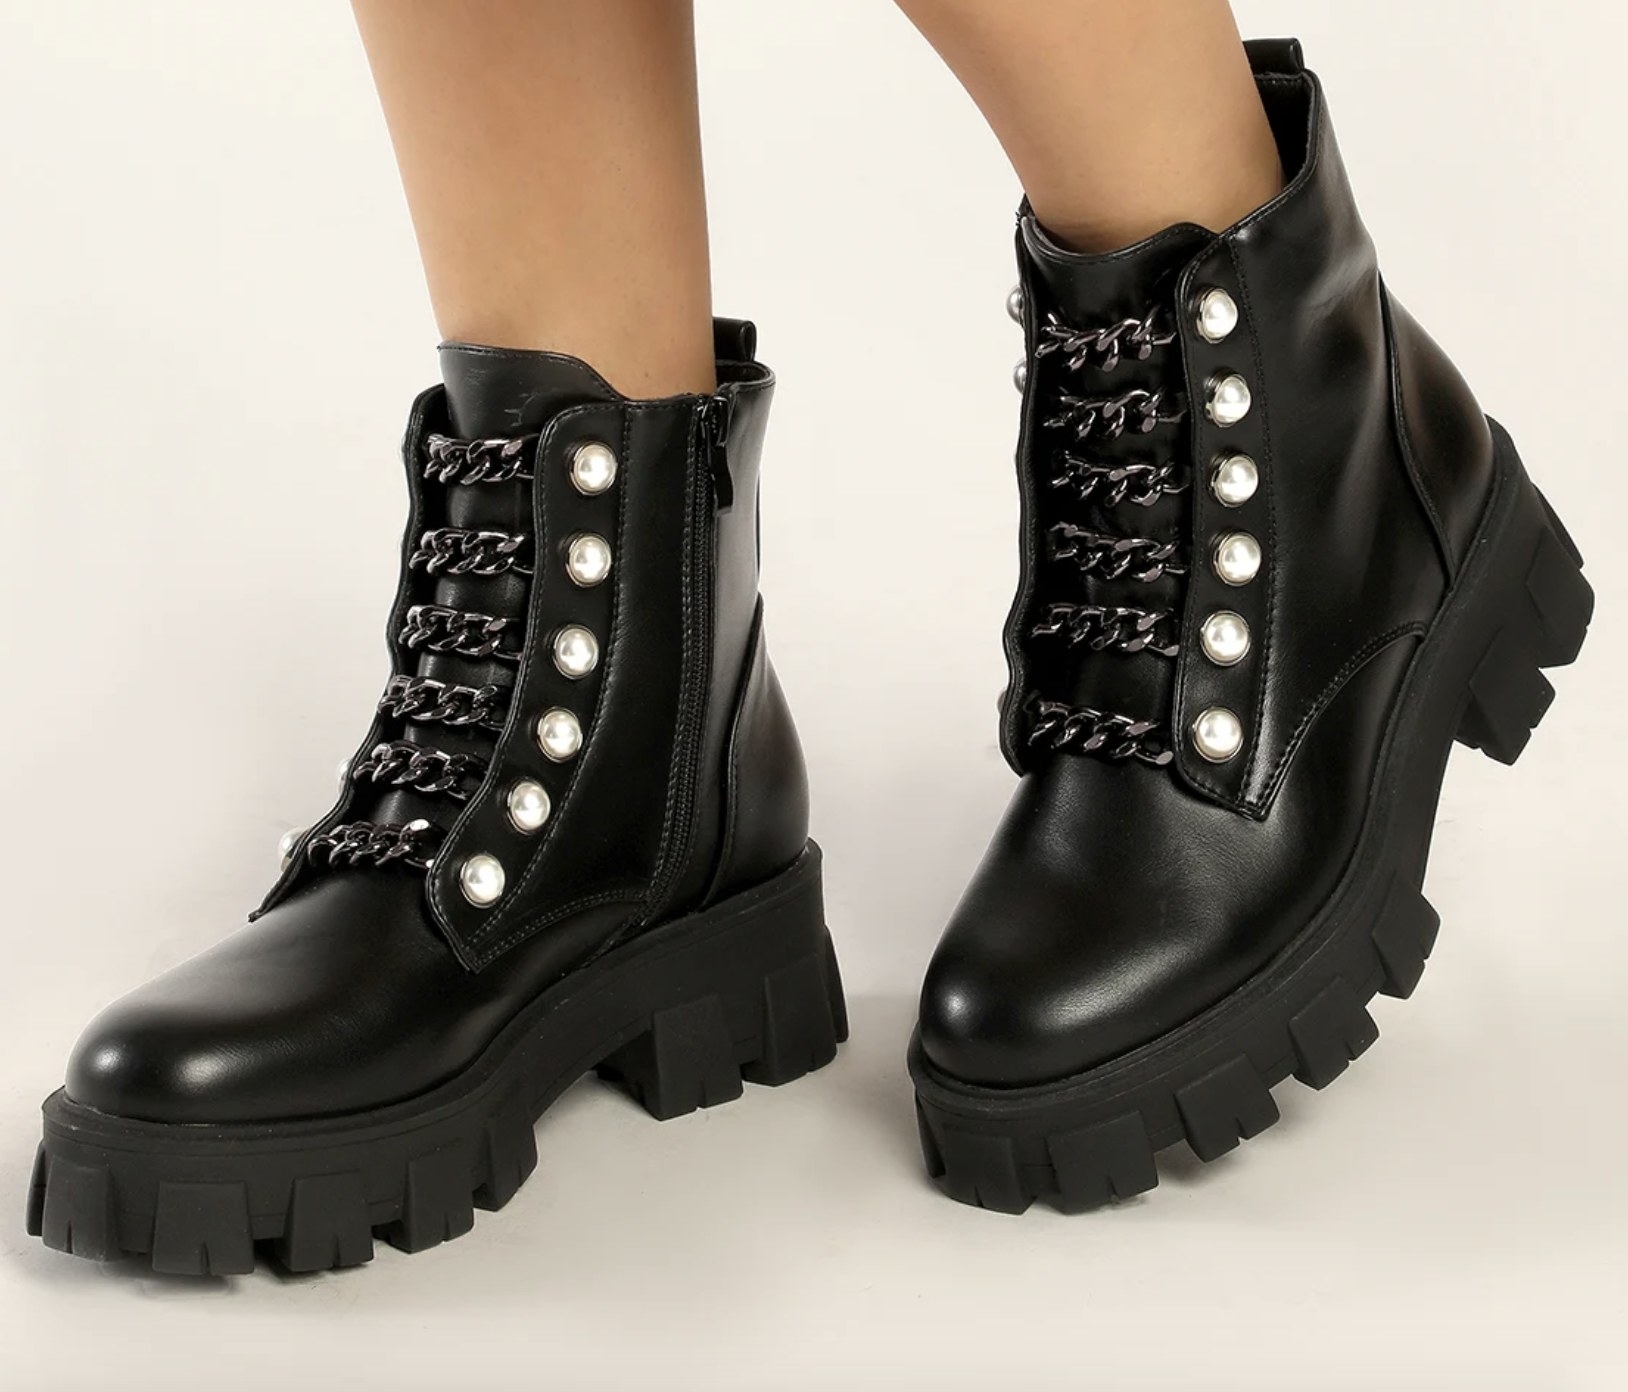 The black booties have black chains and shiny pearls